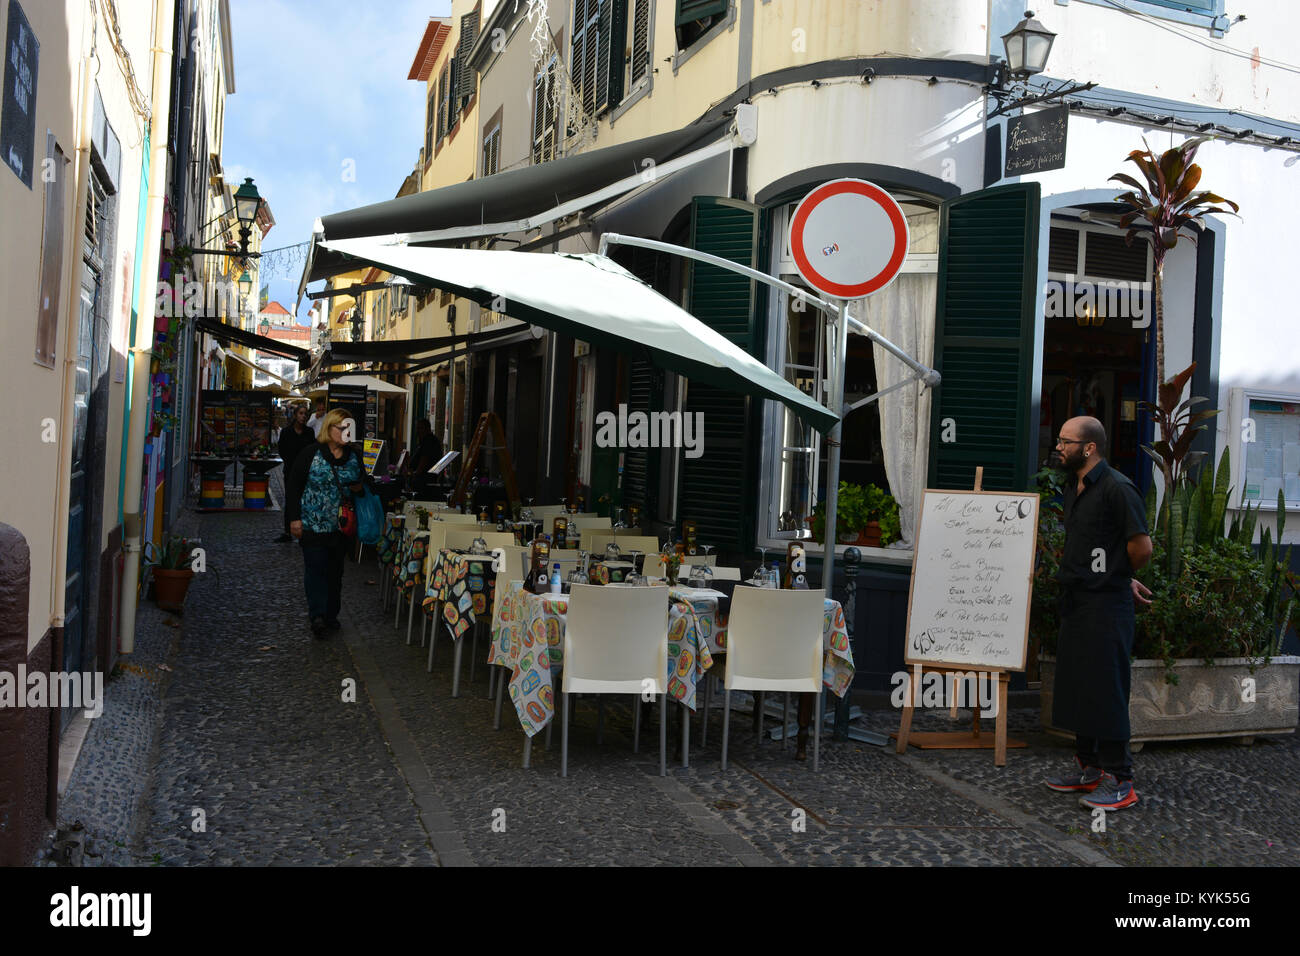 Restaurant in Rua de Santa Maria, a public art space to revitalise an old, neglected street in the Old Town of Funchal, Madeira, Portugal Stock Photo